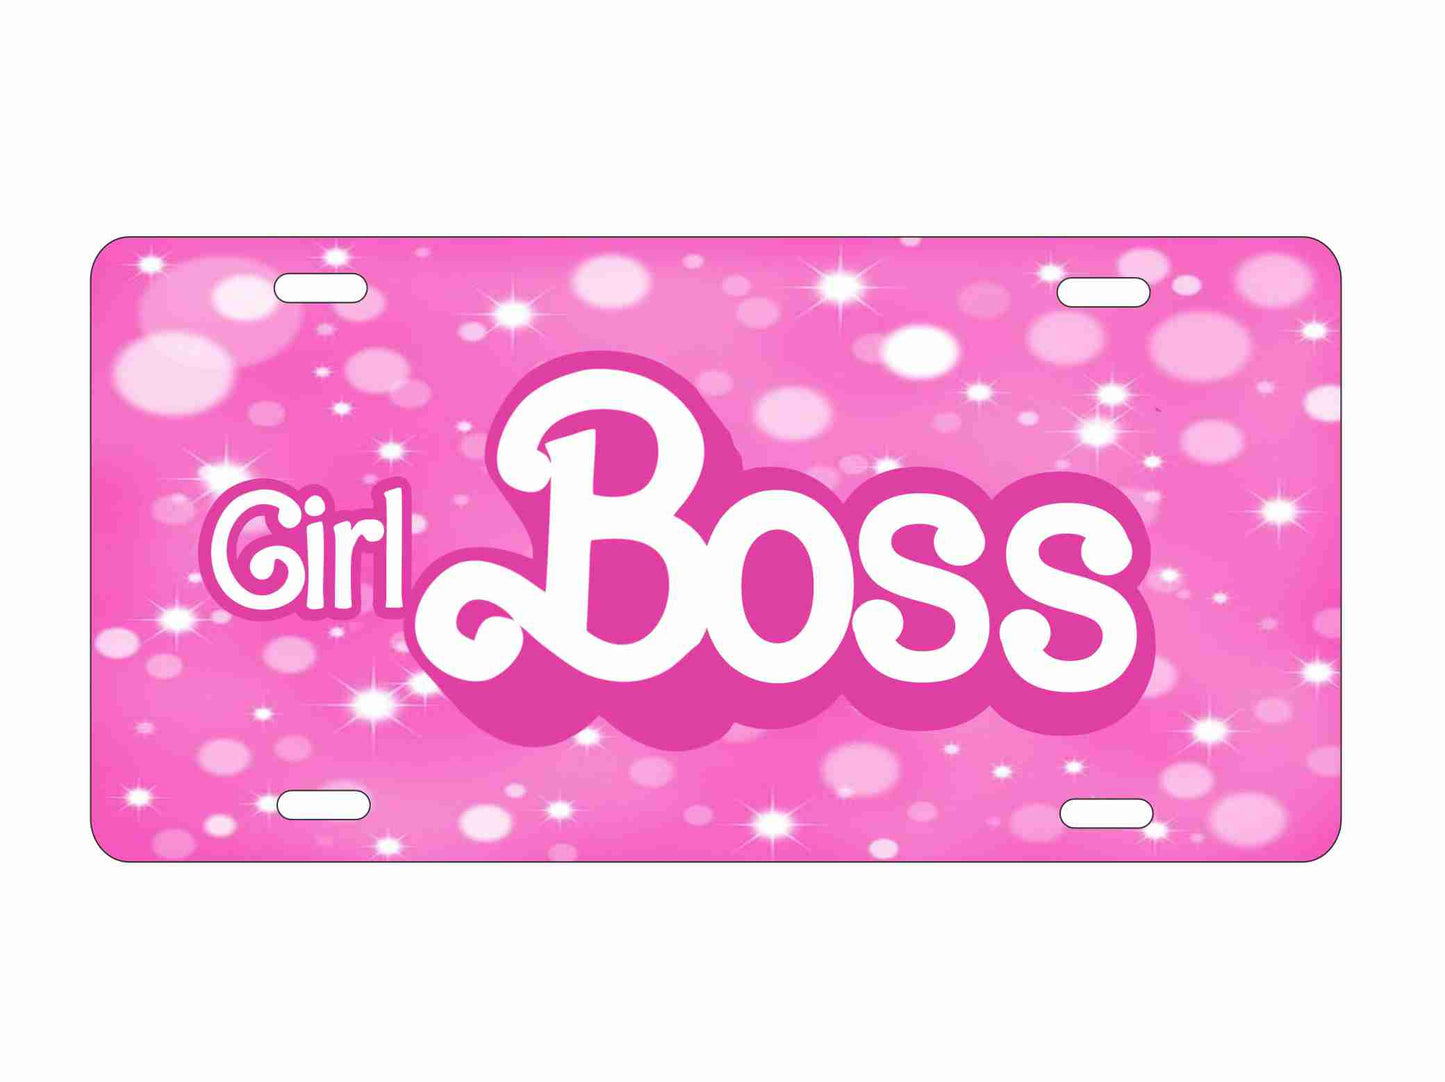 Girl Boss novelty front license plate decorative aluminum vanity car tag